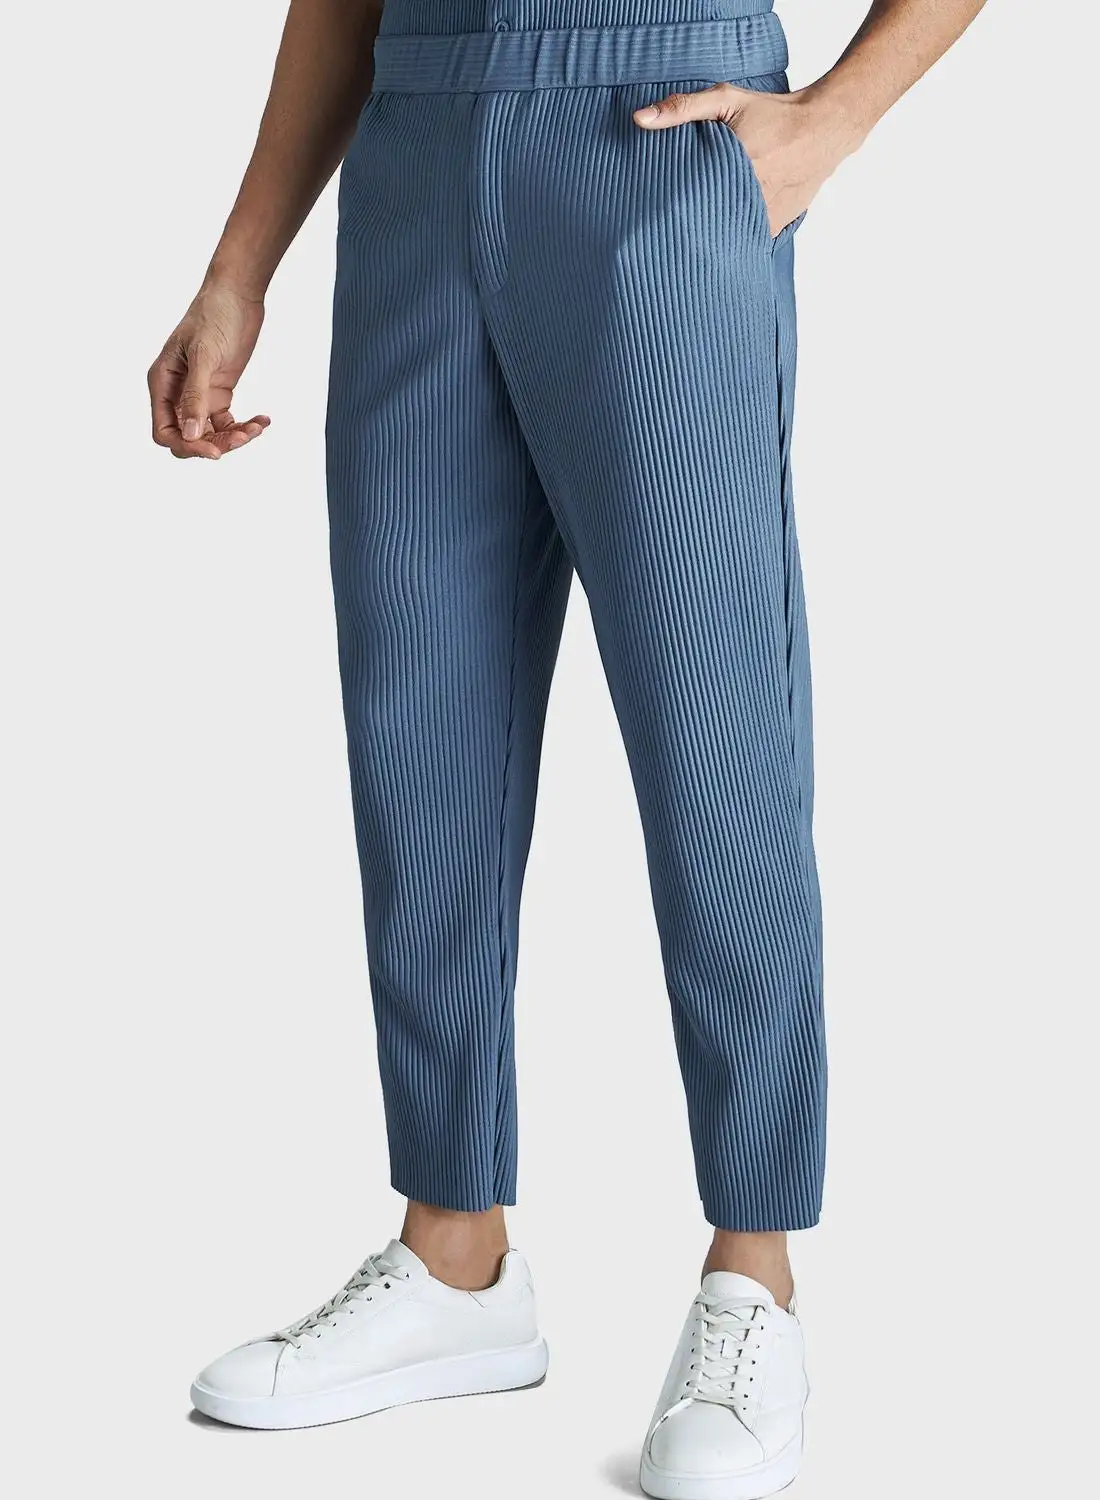 Iconic Striped Slim Fit Trousers